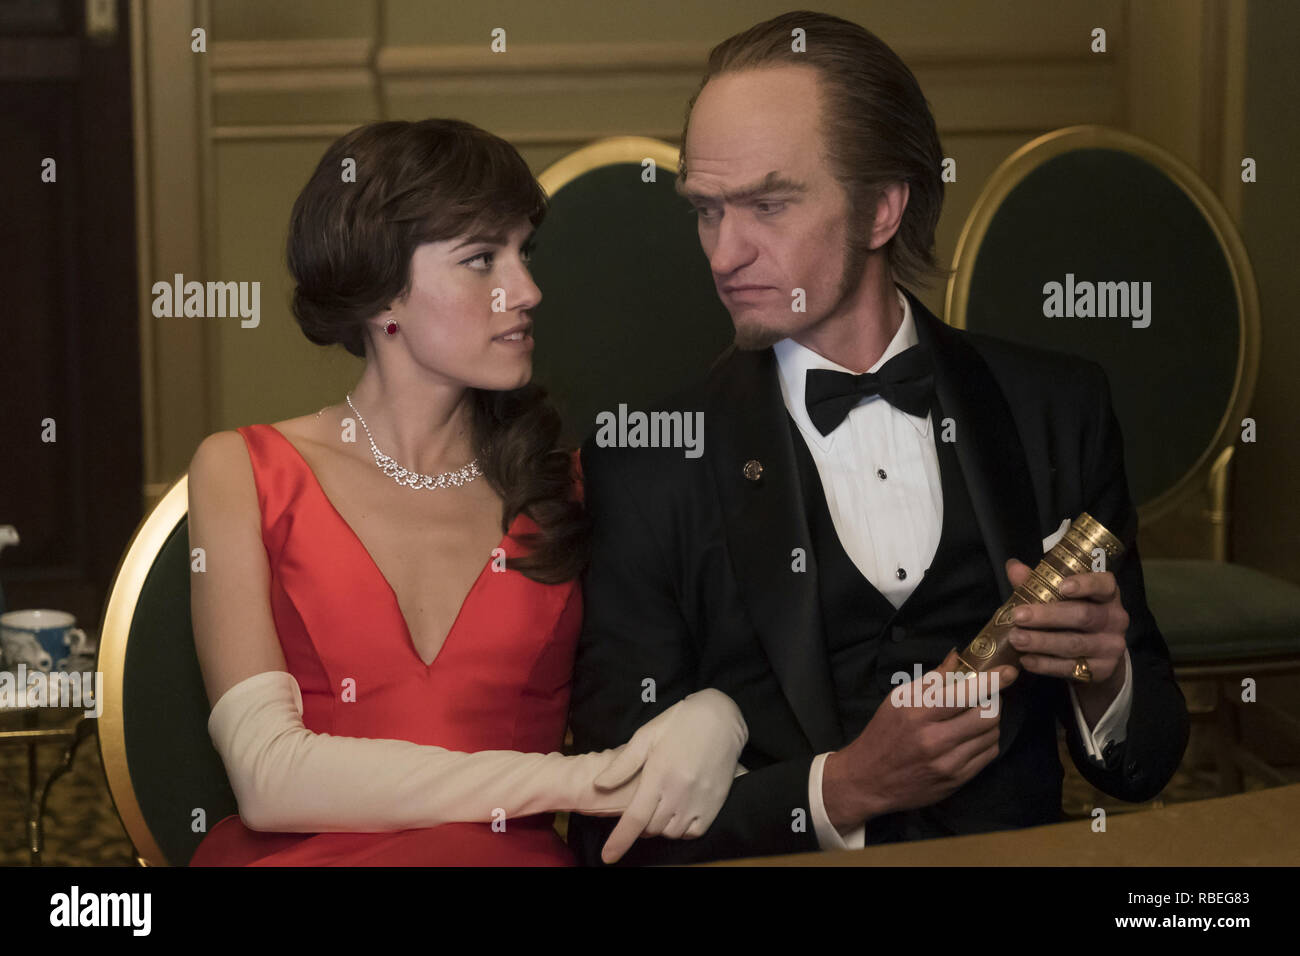 Allison Williams, Neil Patrick Harris, 'A Series Of Unfortunate Events' Season 3 (2018) Credit: Netflix / The Hollywood Archive Stock Photo